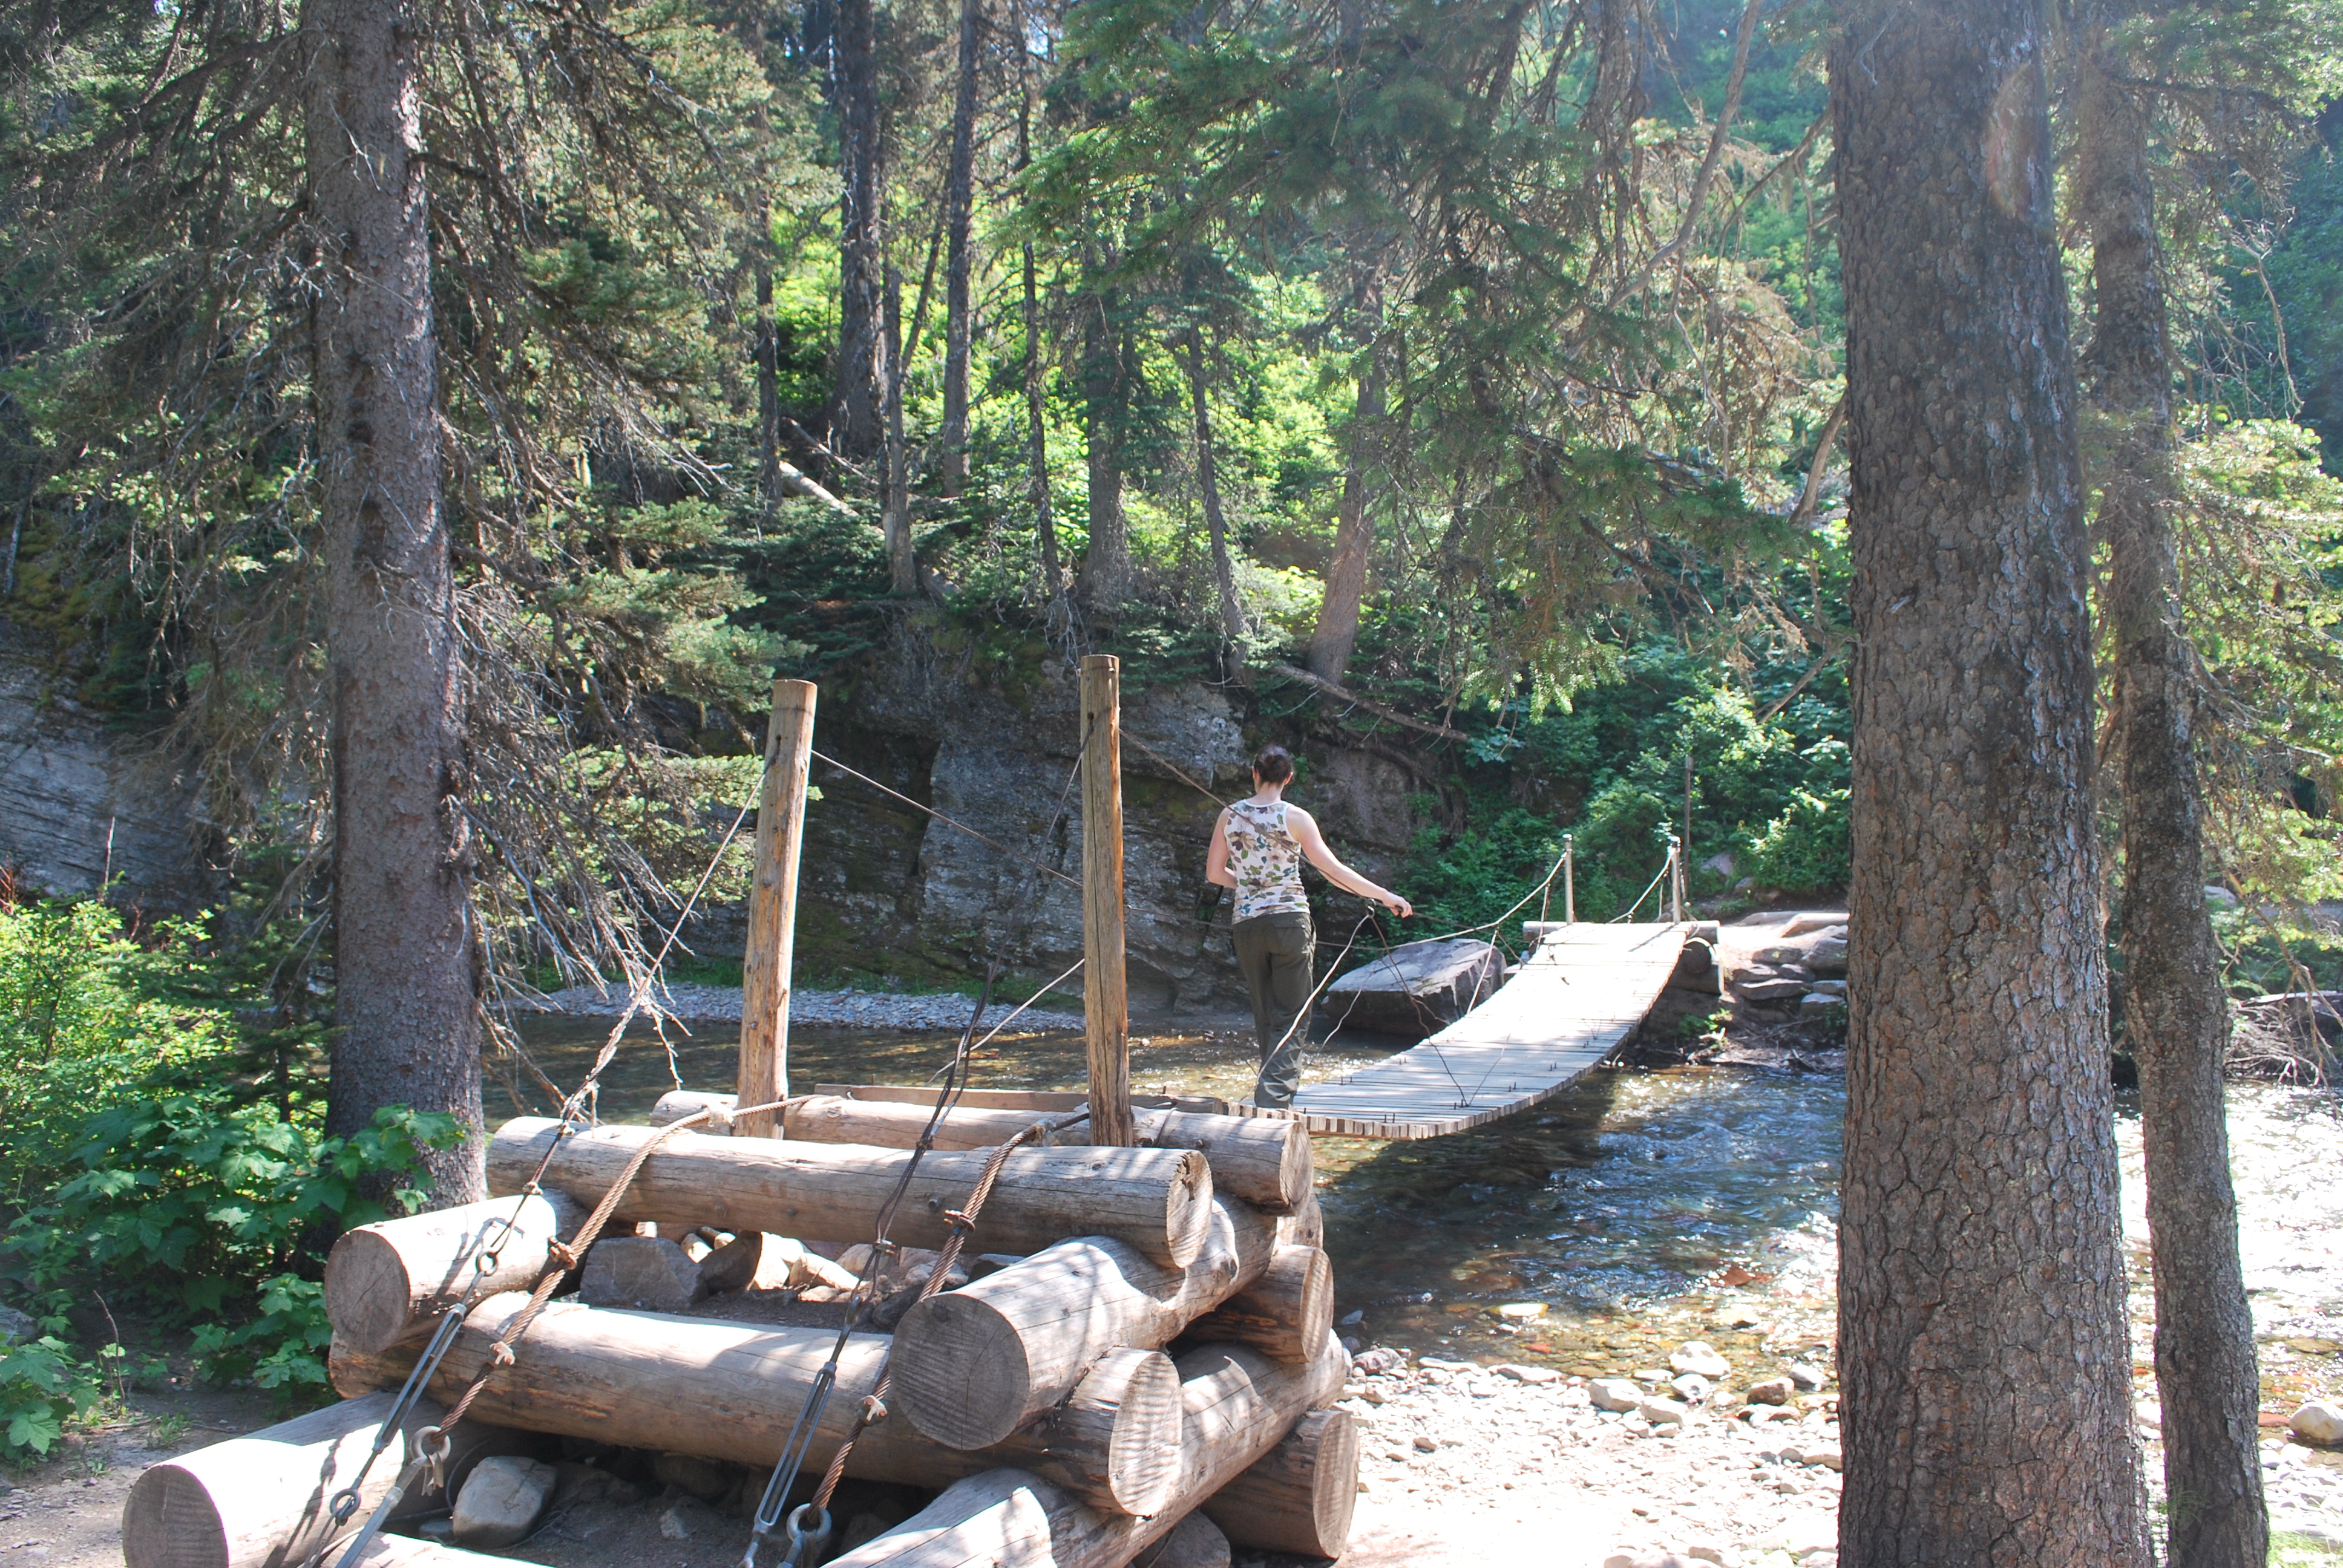 Adult female crossing a small wooden suspension bridge surrounded by forest.